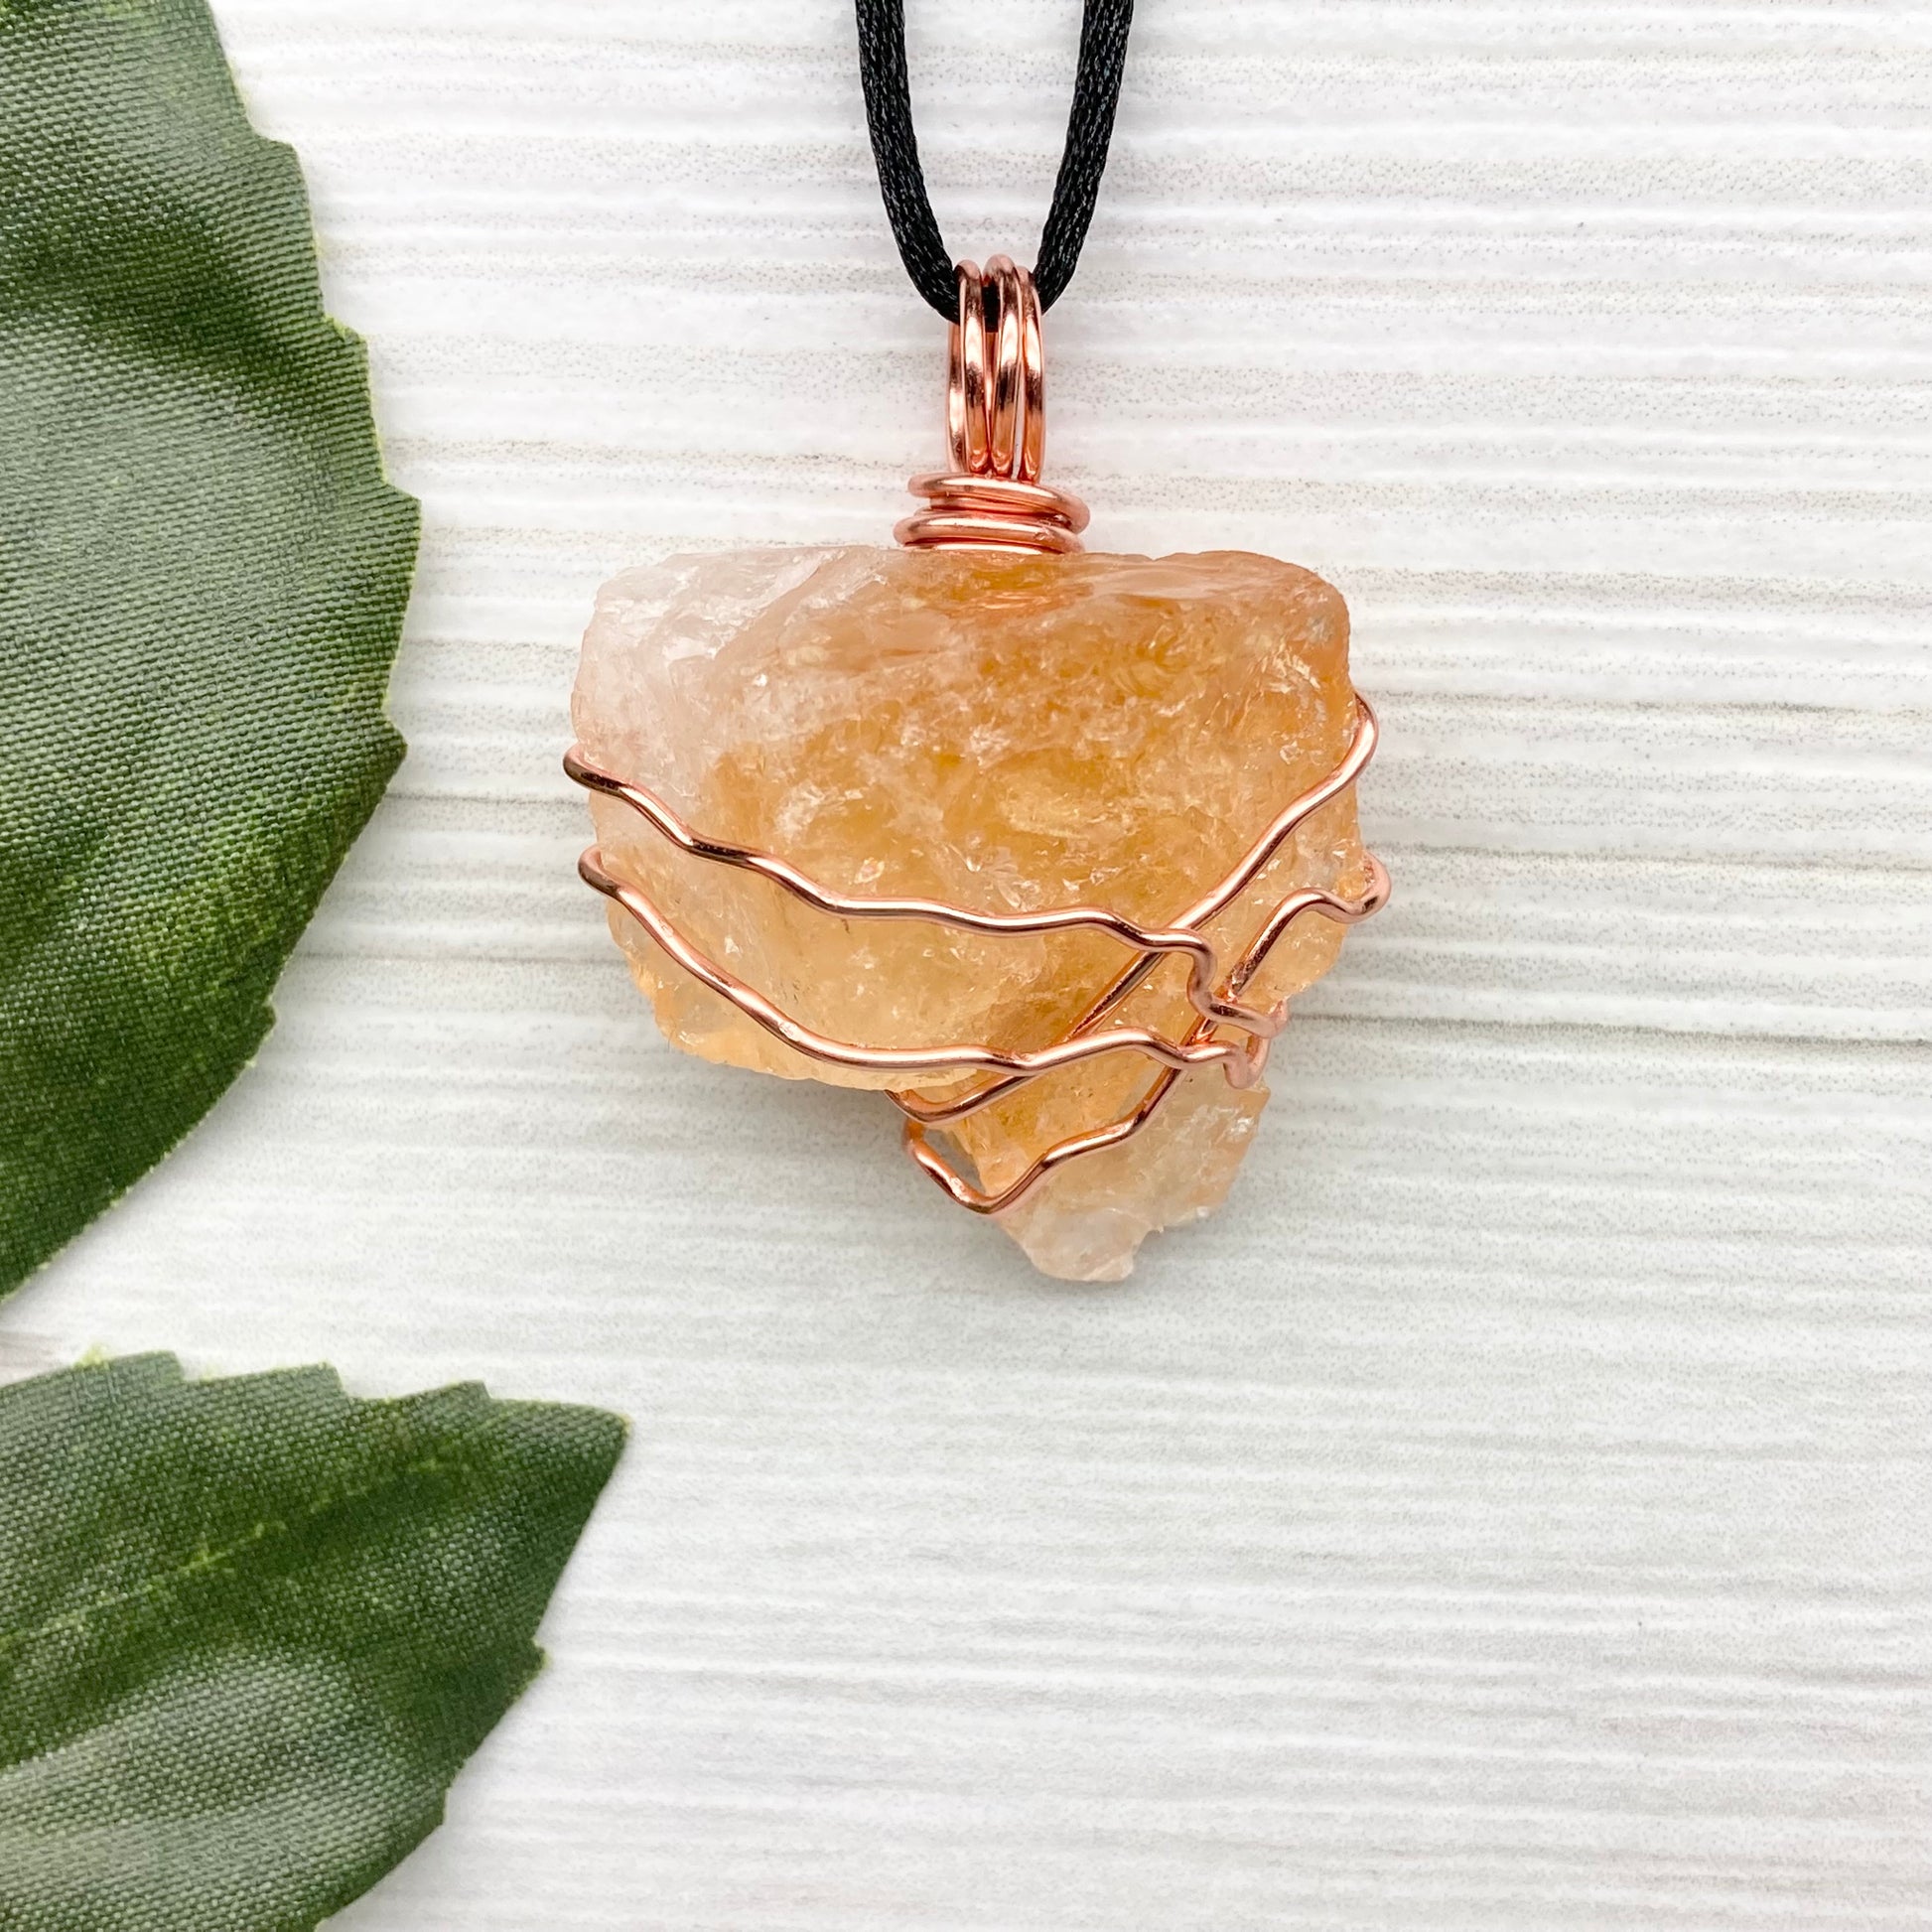 Chunky Raw Citrine Necklace. Larger Yellow Orange Crystal Wrapped With Tarnish Resistant Copper Wire. Comes On A Black Chain. Metaphysical Jewelry.